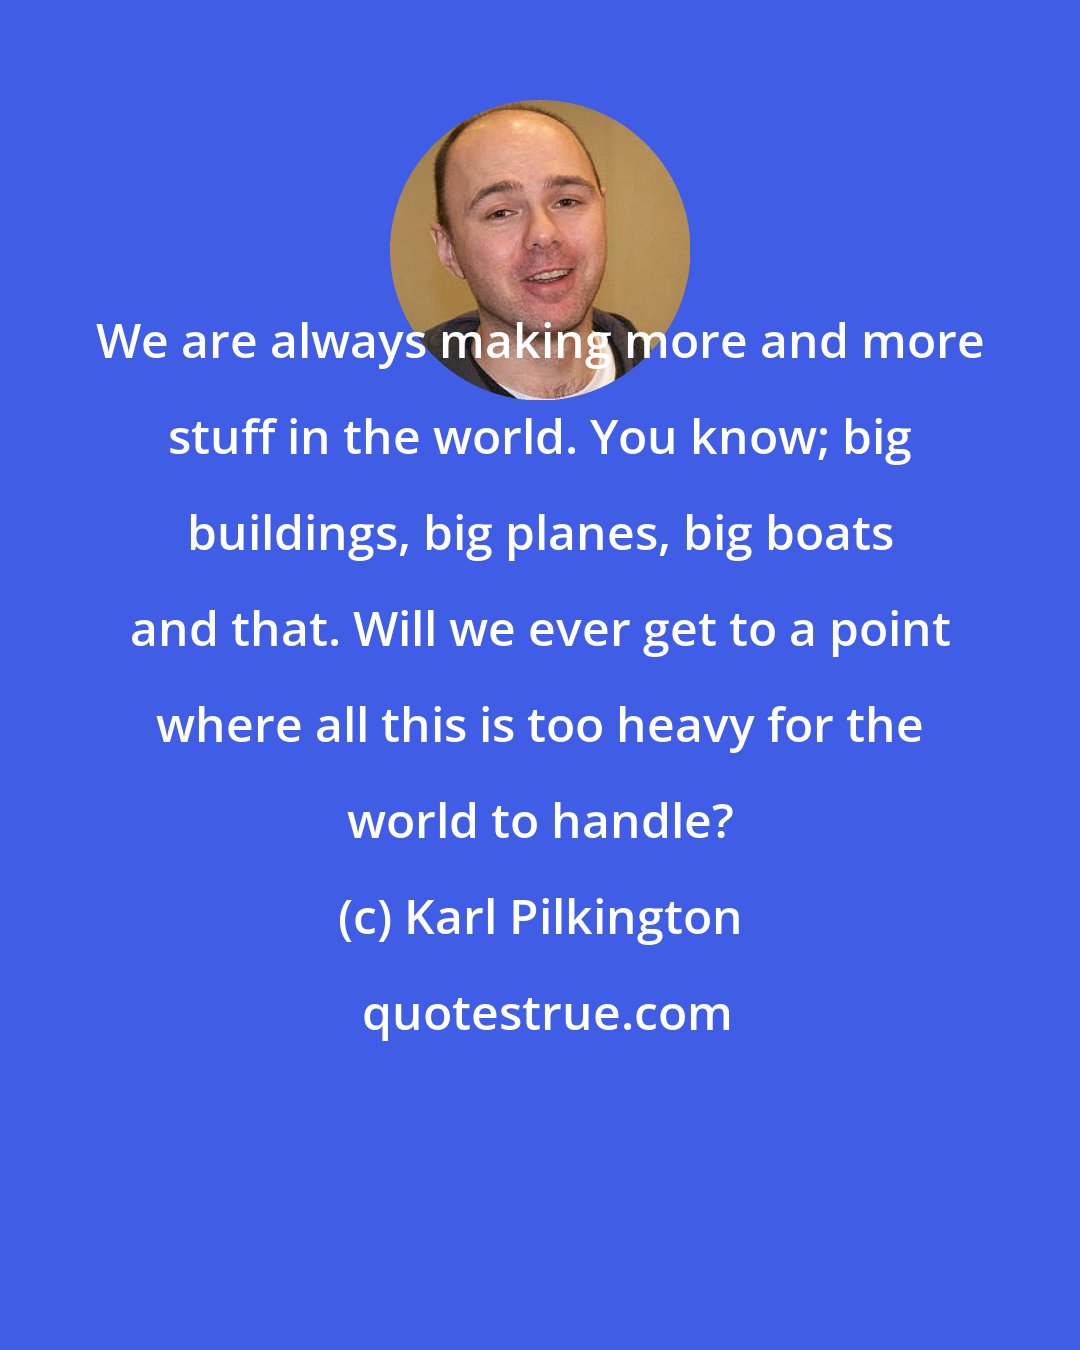 Karl Pilkington: We are always making more and more stuff in the world. You know; big buildings, big planes, big boats and that. Will we ever get to a point where all this is too heavy for the world to handle?